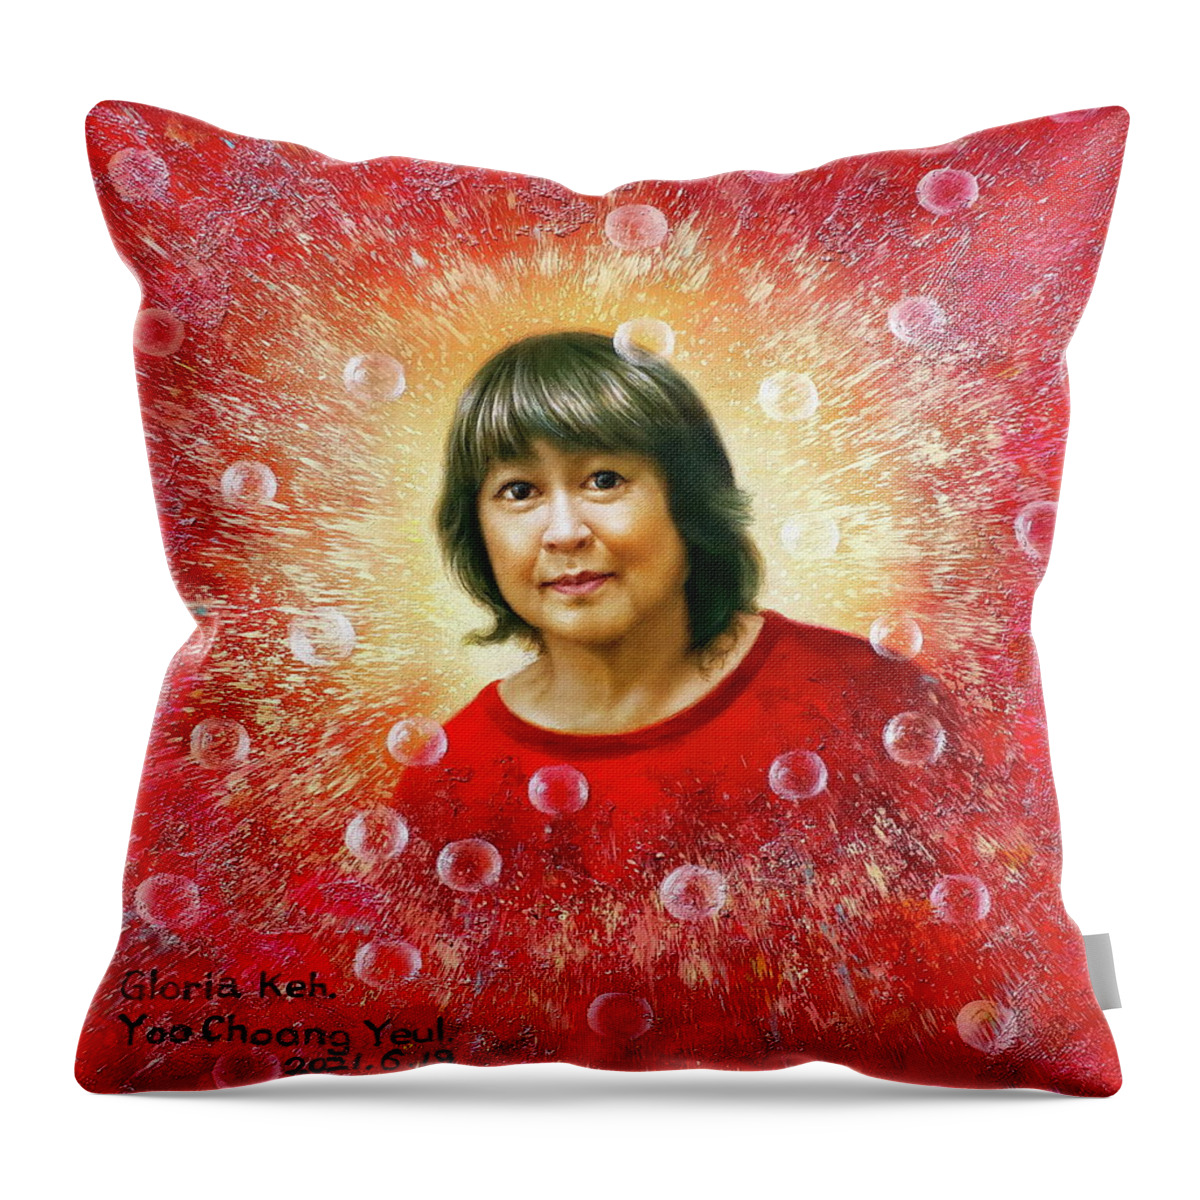 Collaboration Throw Pillow featuring the painting Keh, Yoo by Yoo Choong Yeul